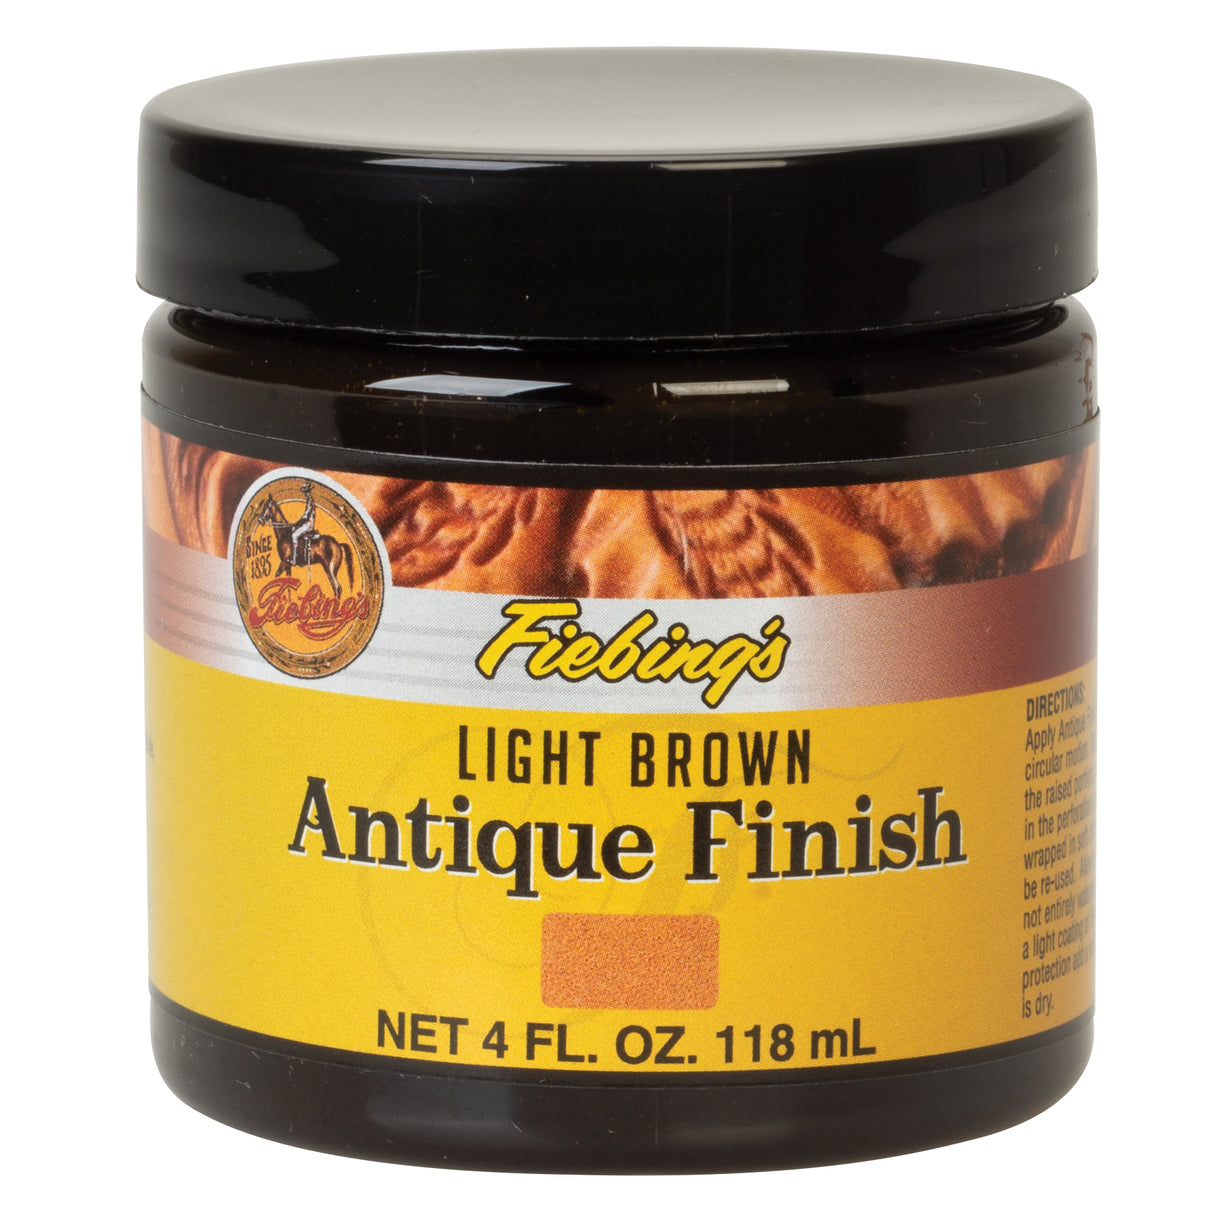 Fiebing's Antique Finish — Tandy Leather, Inc.